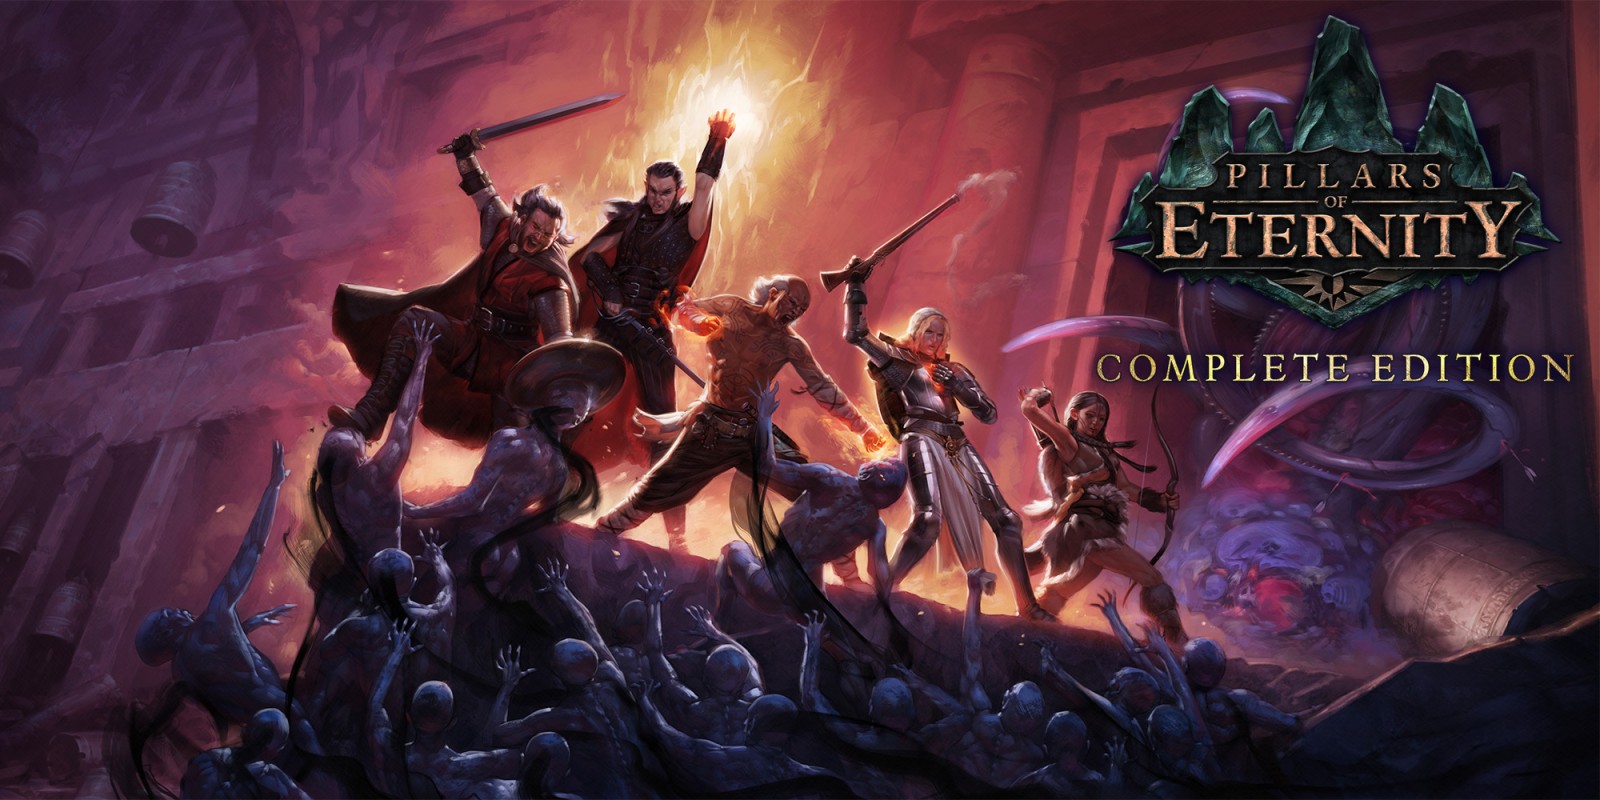 Selling Pillars of Eternity Complete Edition Nintendo Switch Key (NA/EU)-h2x1_nswitchds_pillarsofeternitycompleteedition_image1600w-jpg